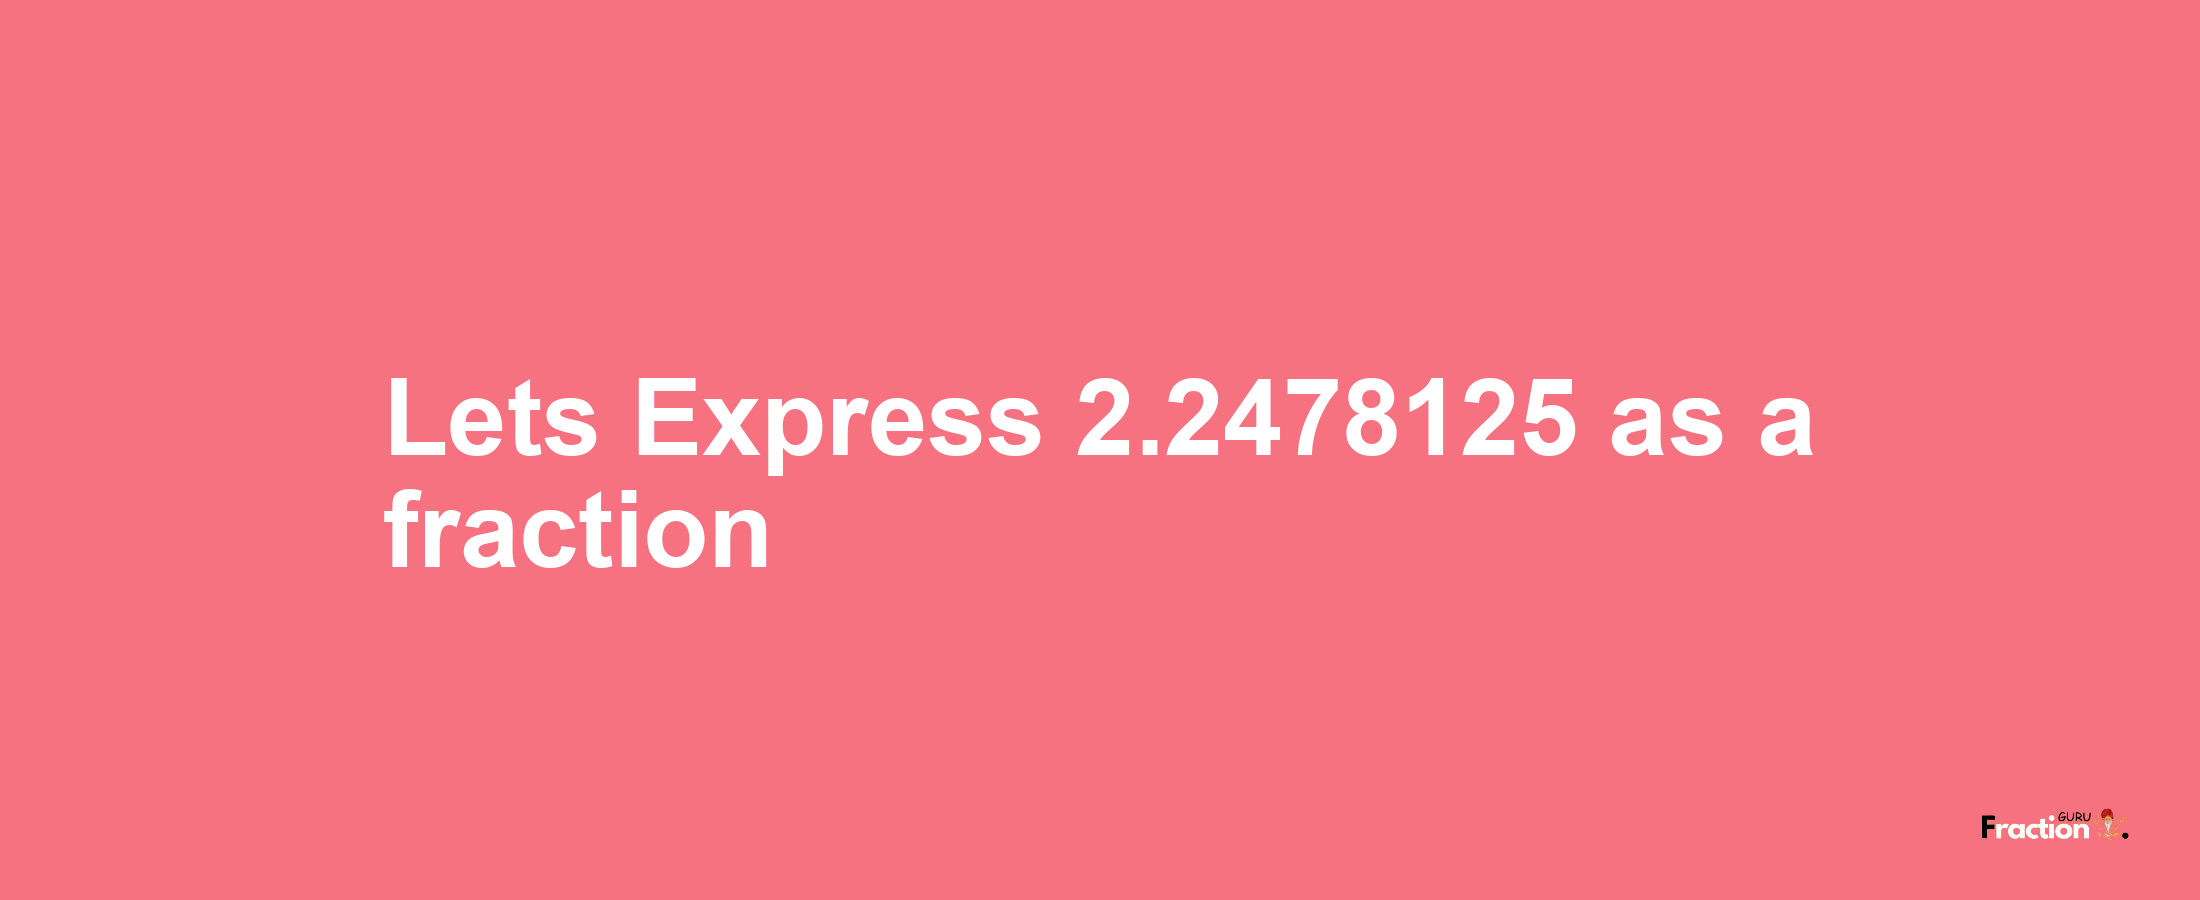 Lets Express 2.2478125 as afraction